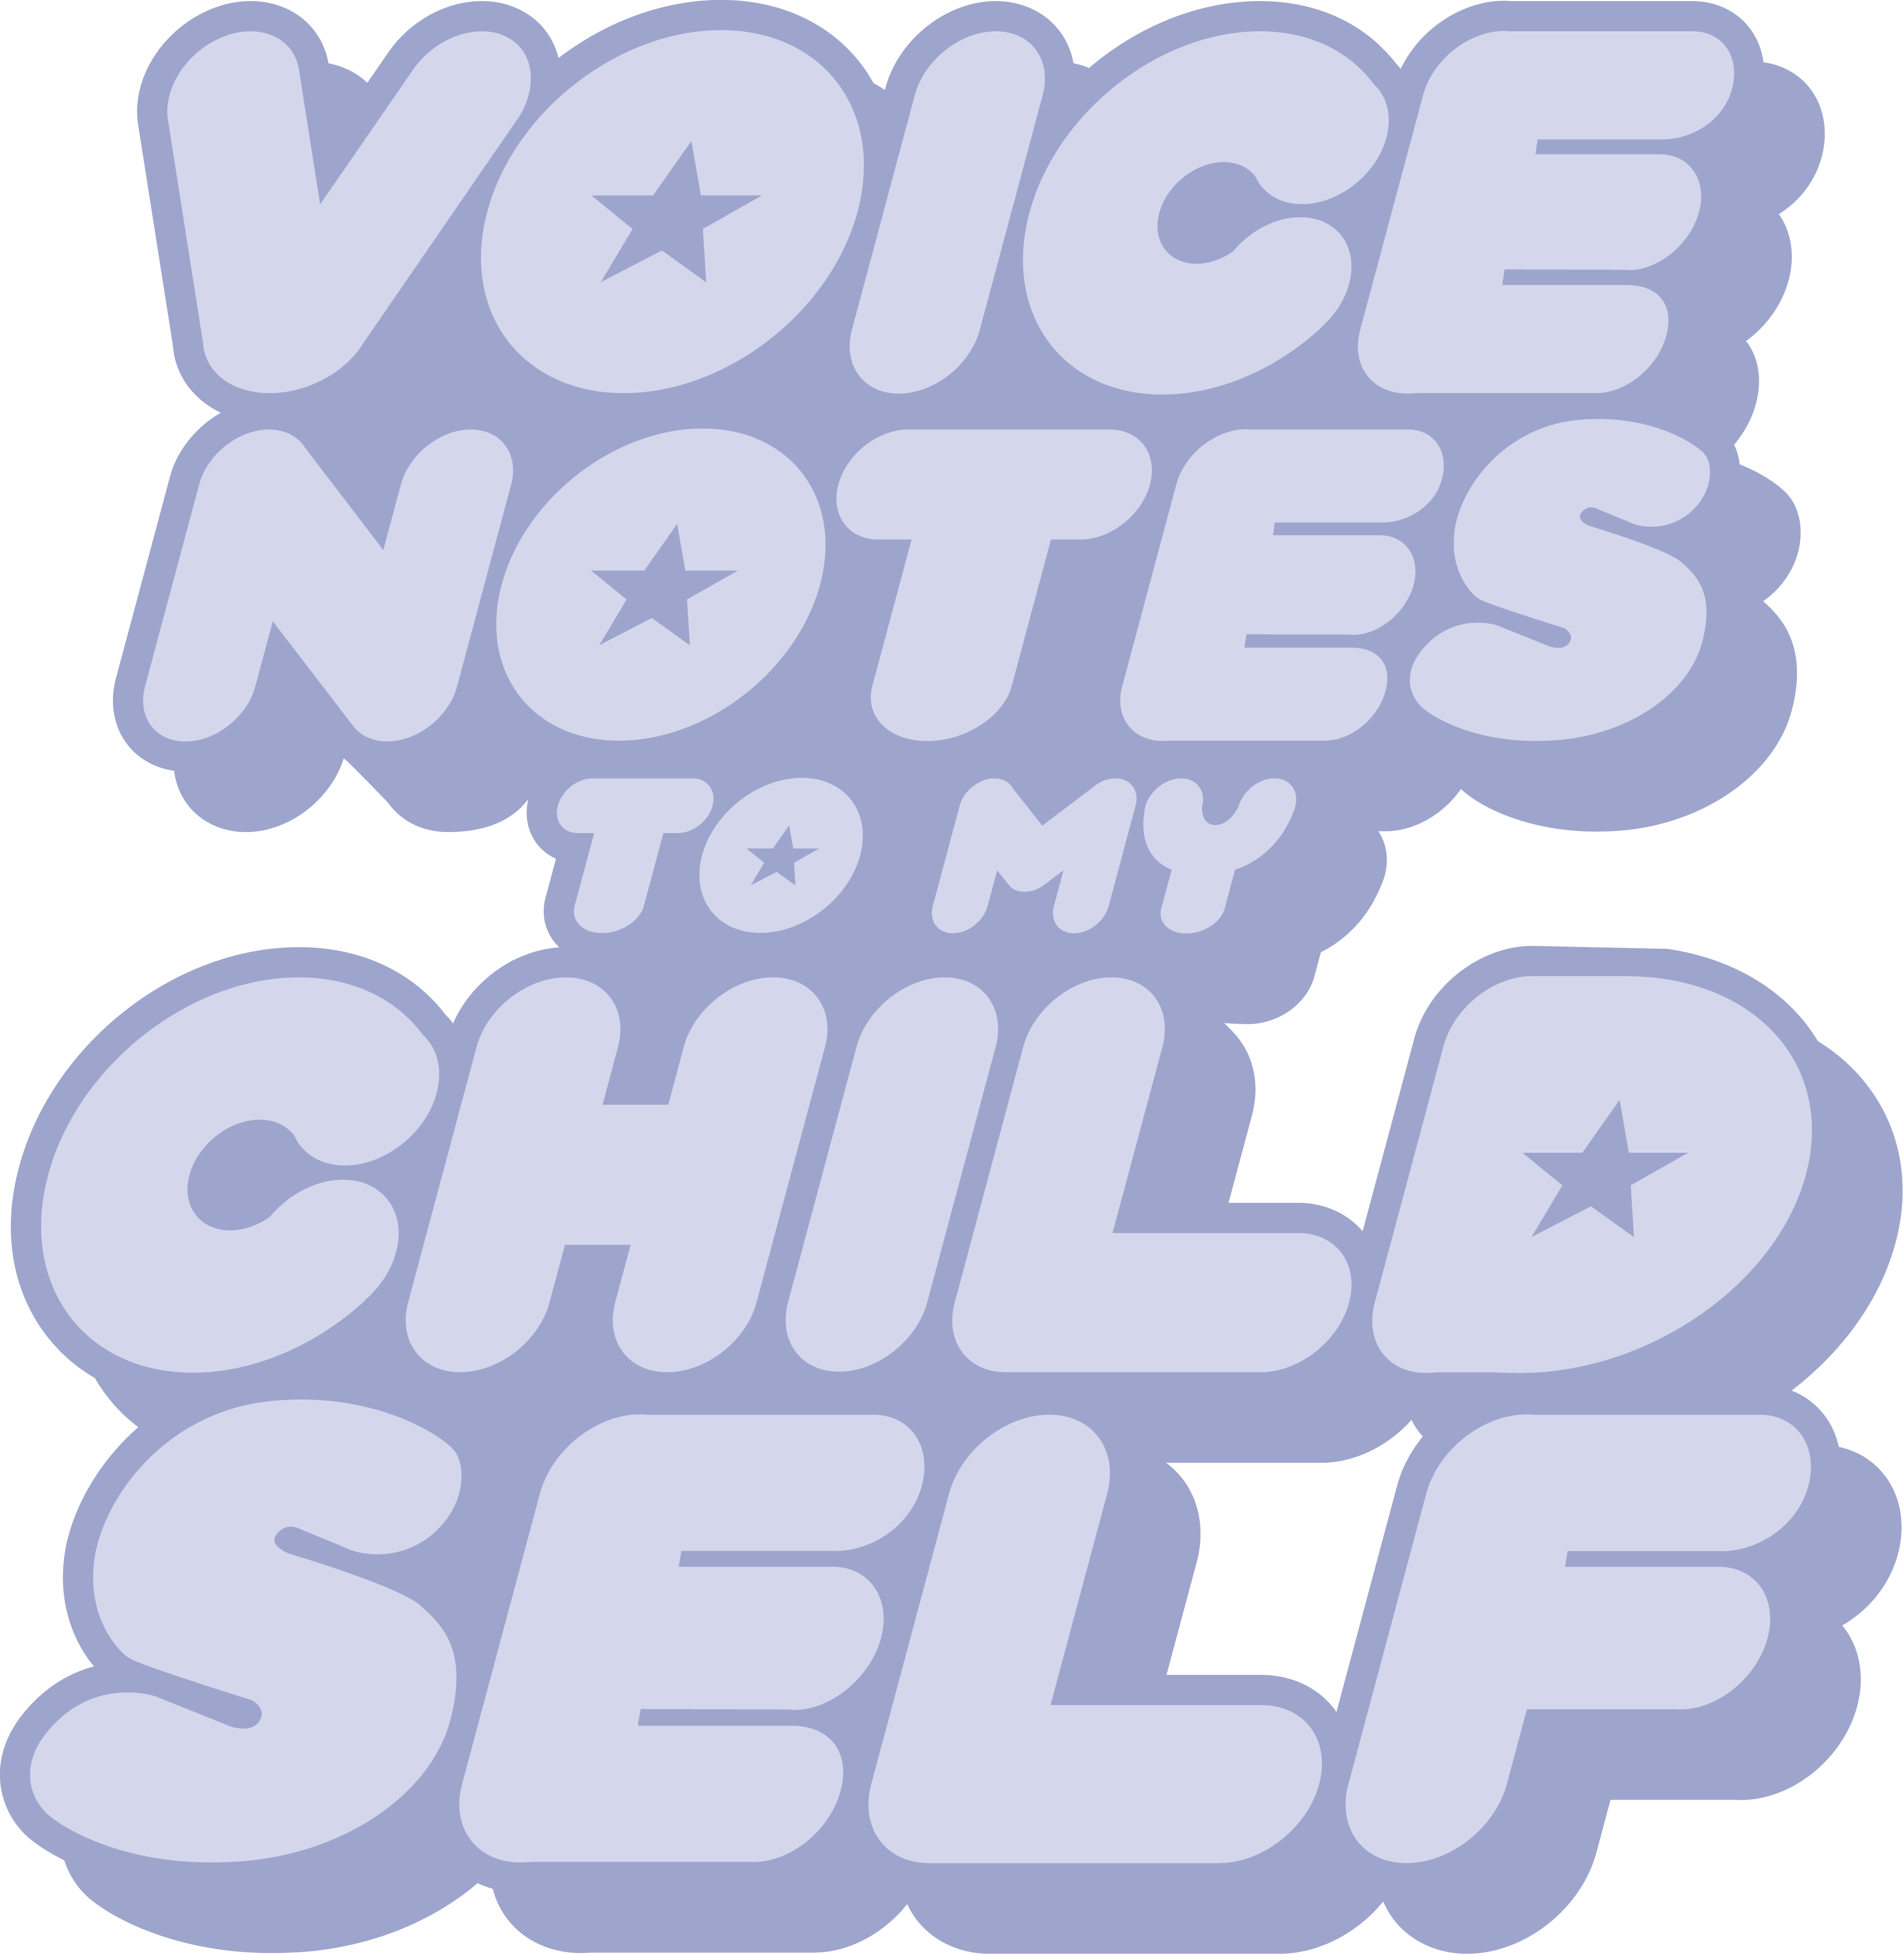 Voice Notes To My Child Self